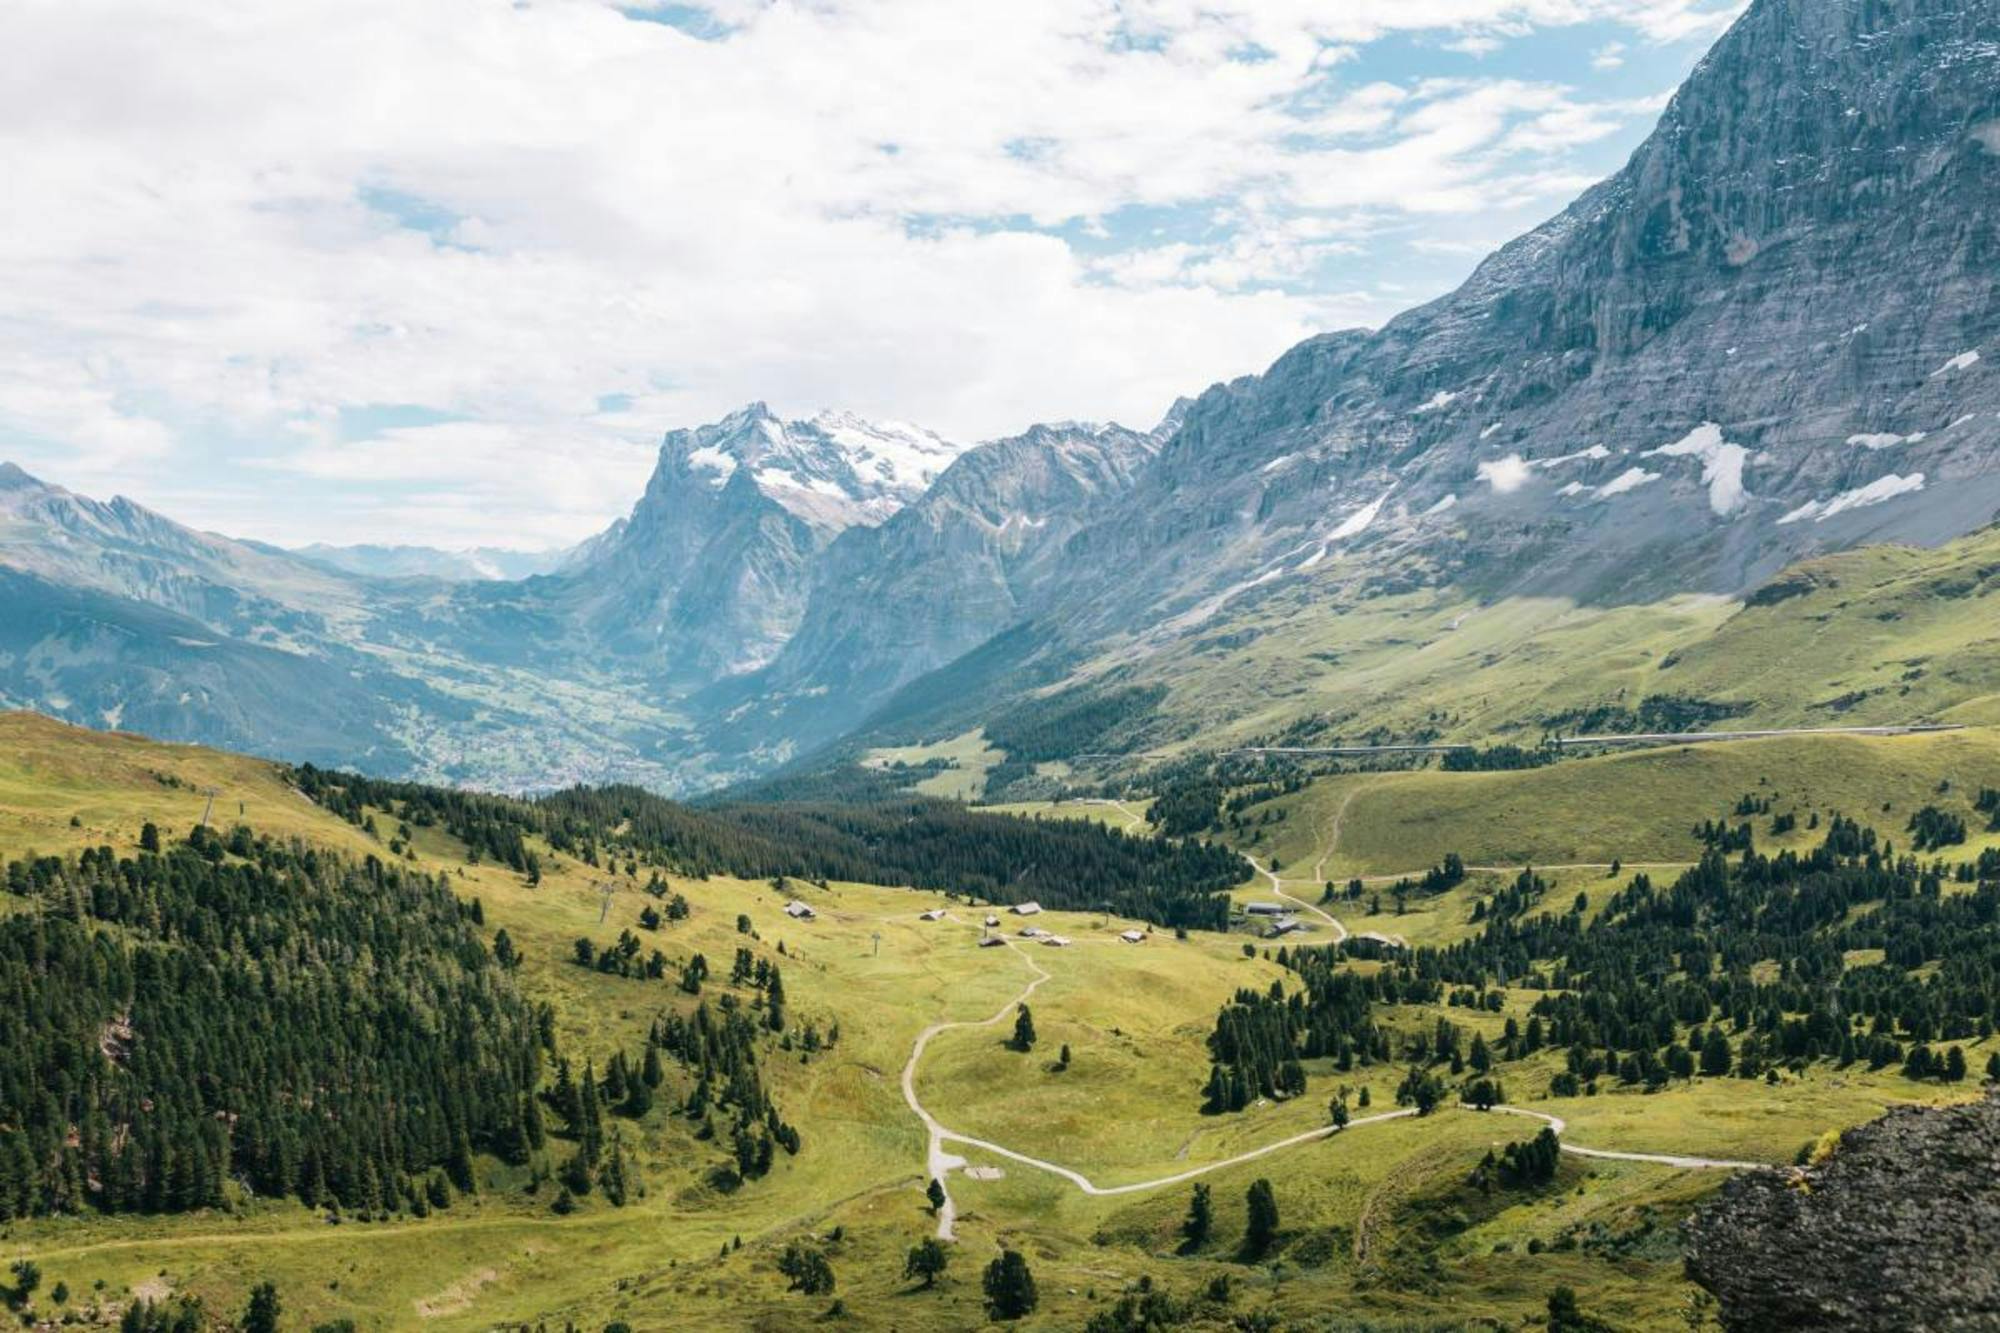 Majestic Swiss Alps towering over a green valley.